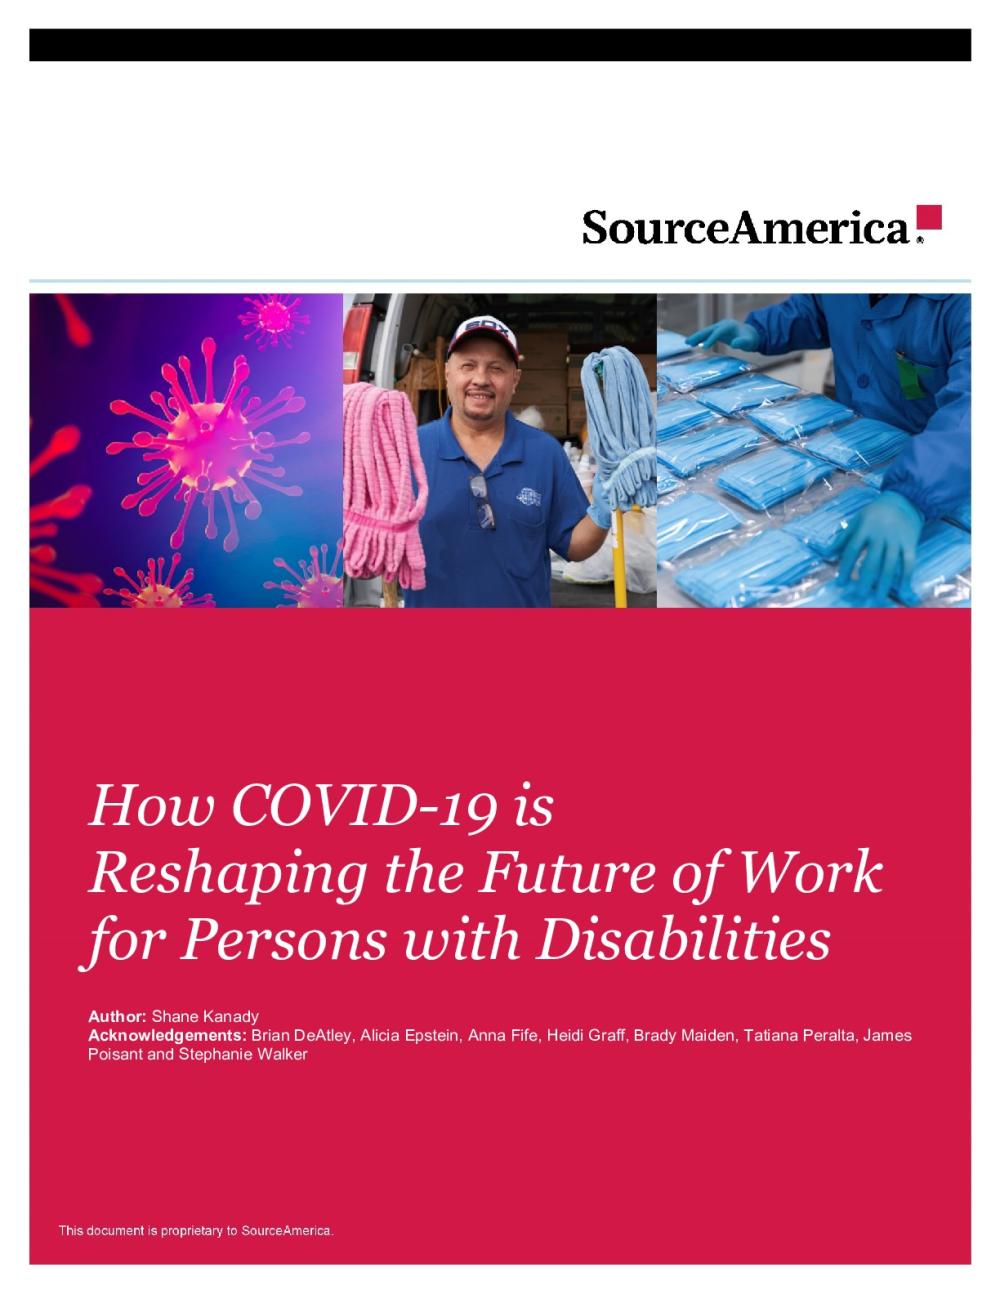 How COVID-19 is Reshaping the Future of Work for Persons with Disabilities